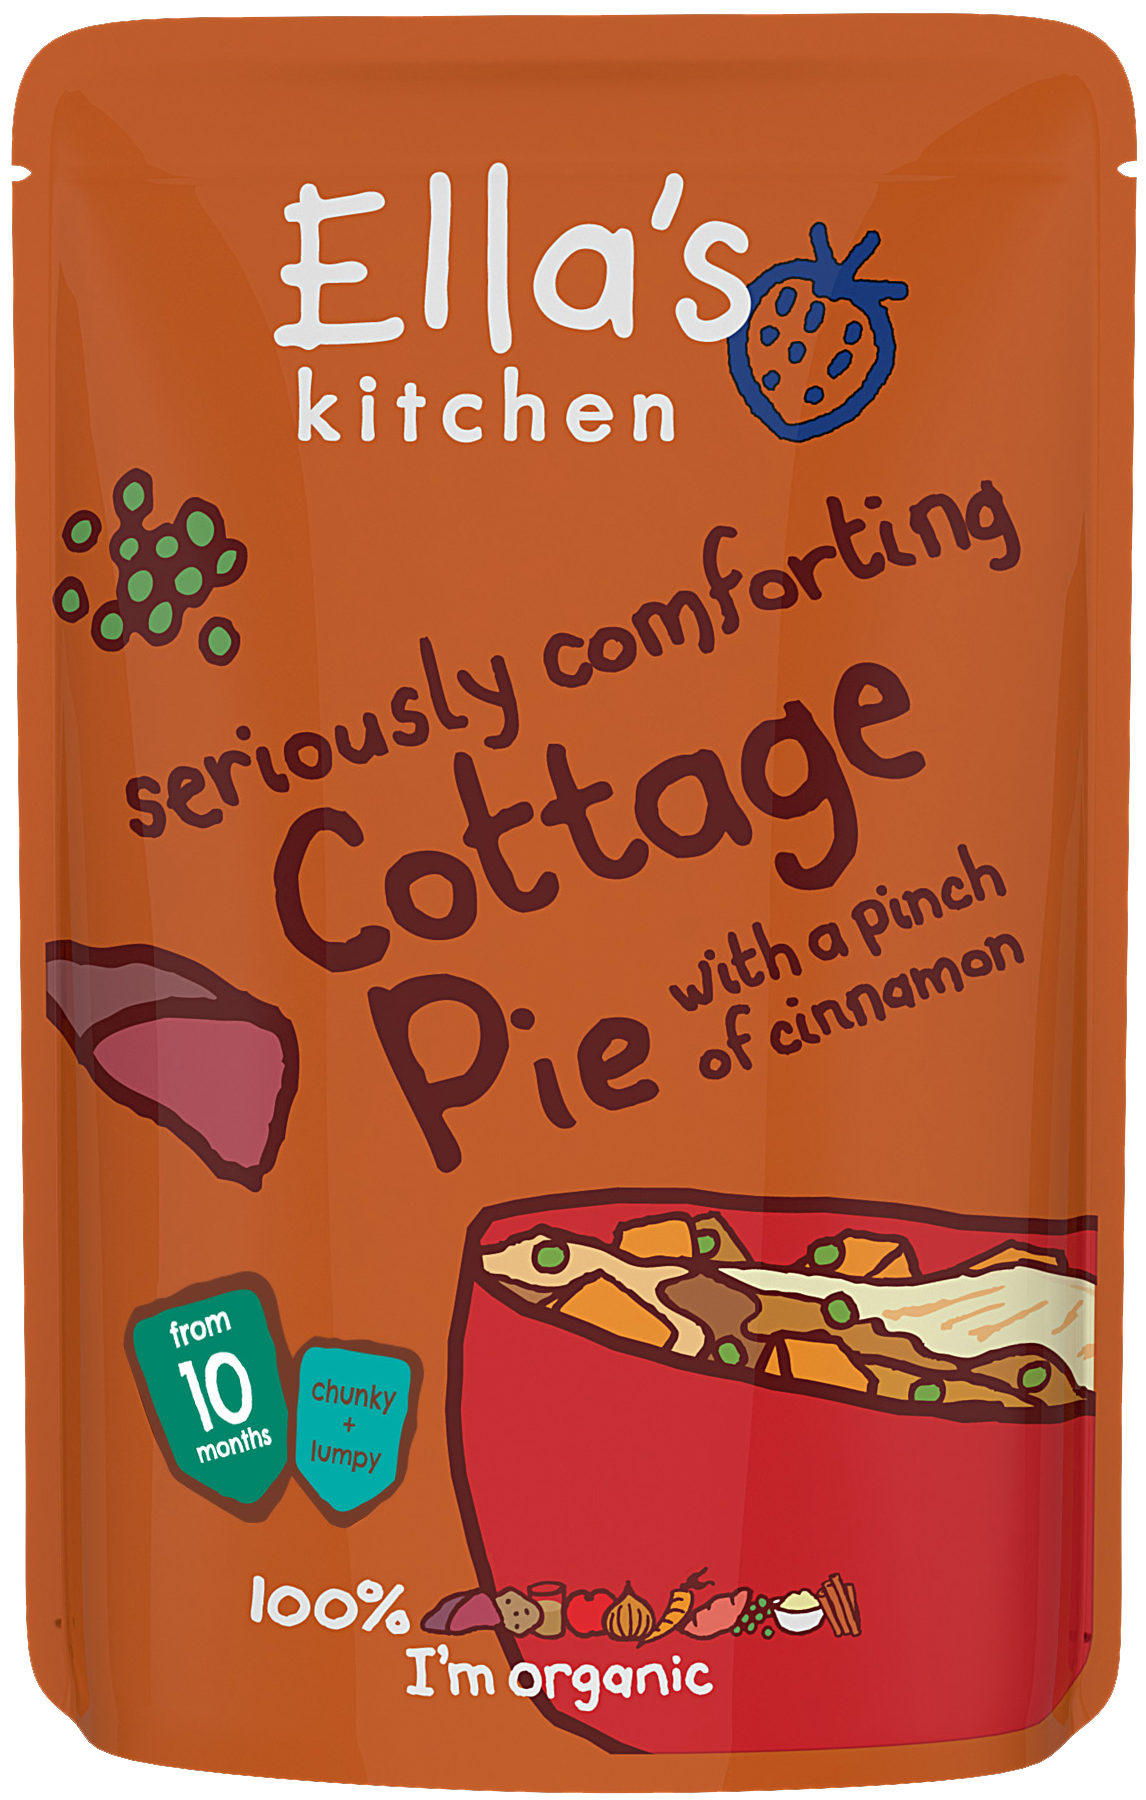 Cottage Pie Stage 3 (Org) 18428A